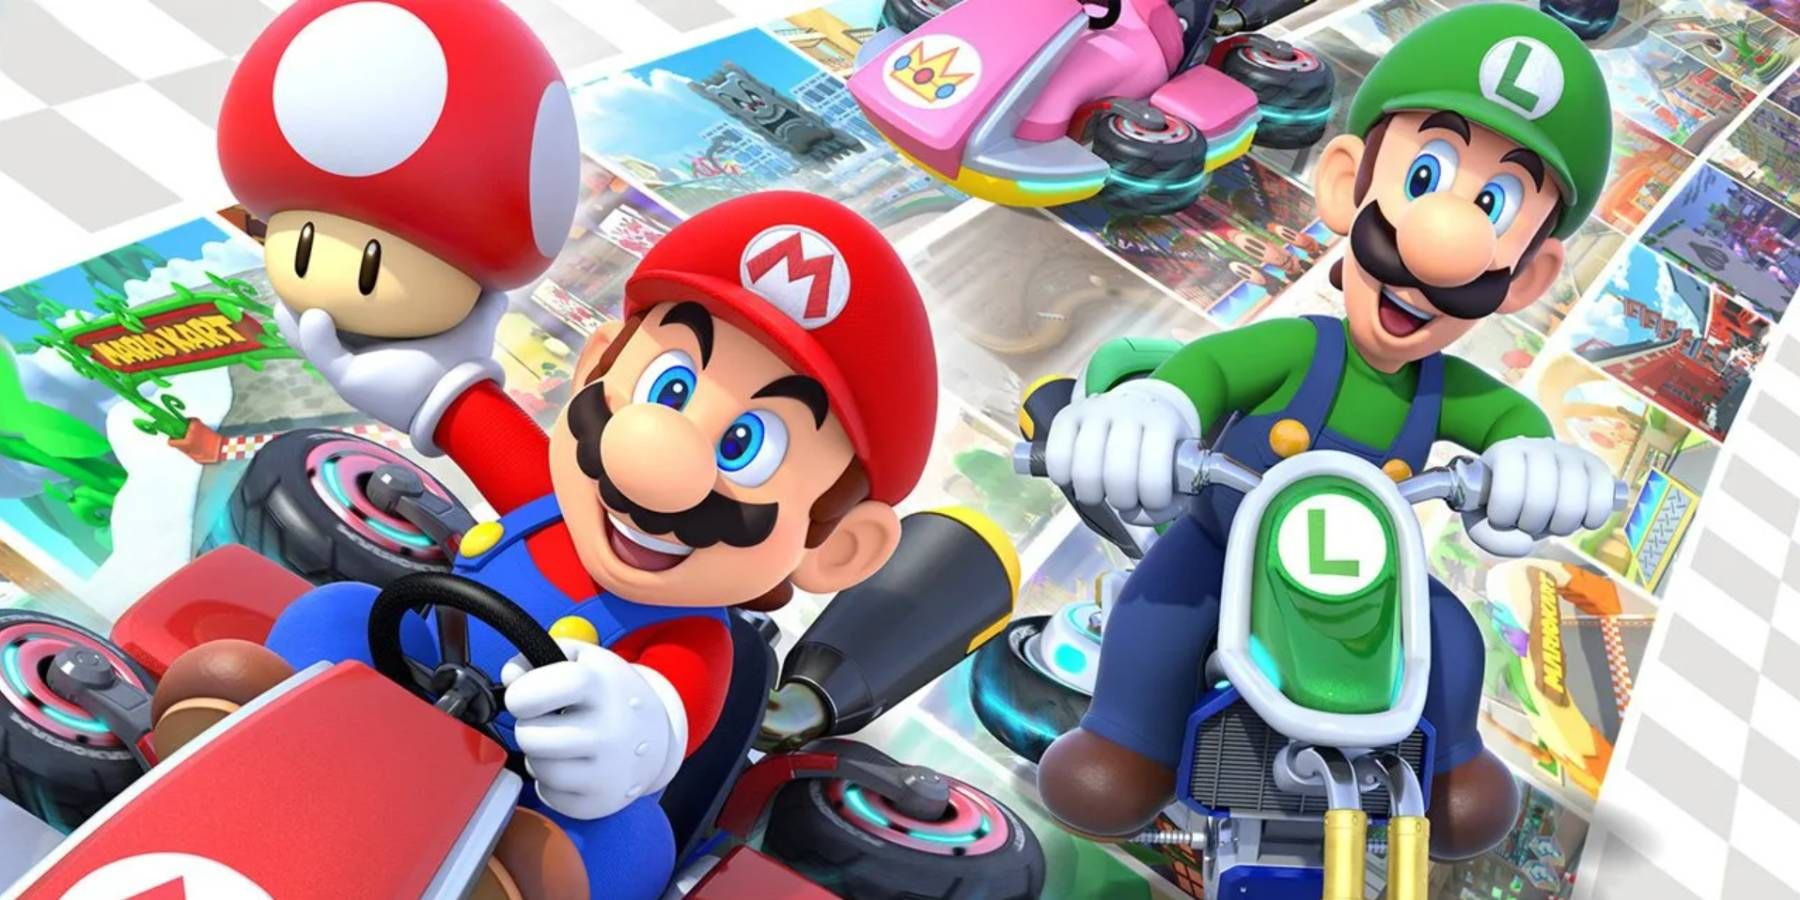 Mario and Luigi from the promo art for the Mario Kart 8 Deluxe Booster Course Pass